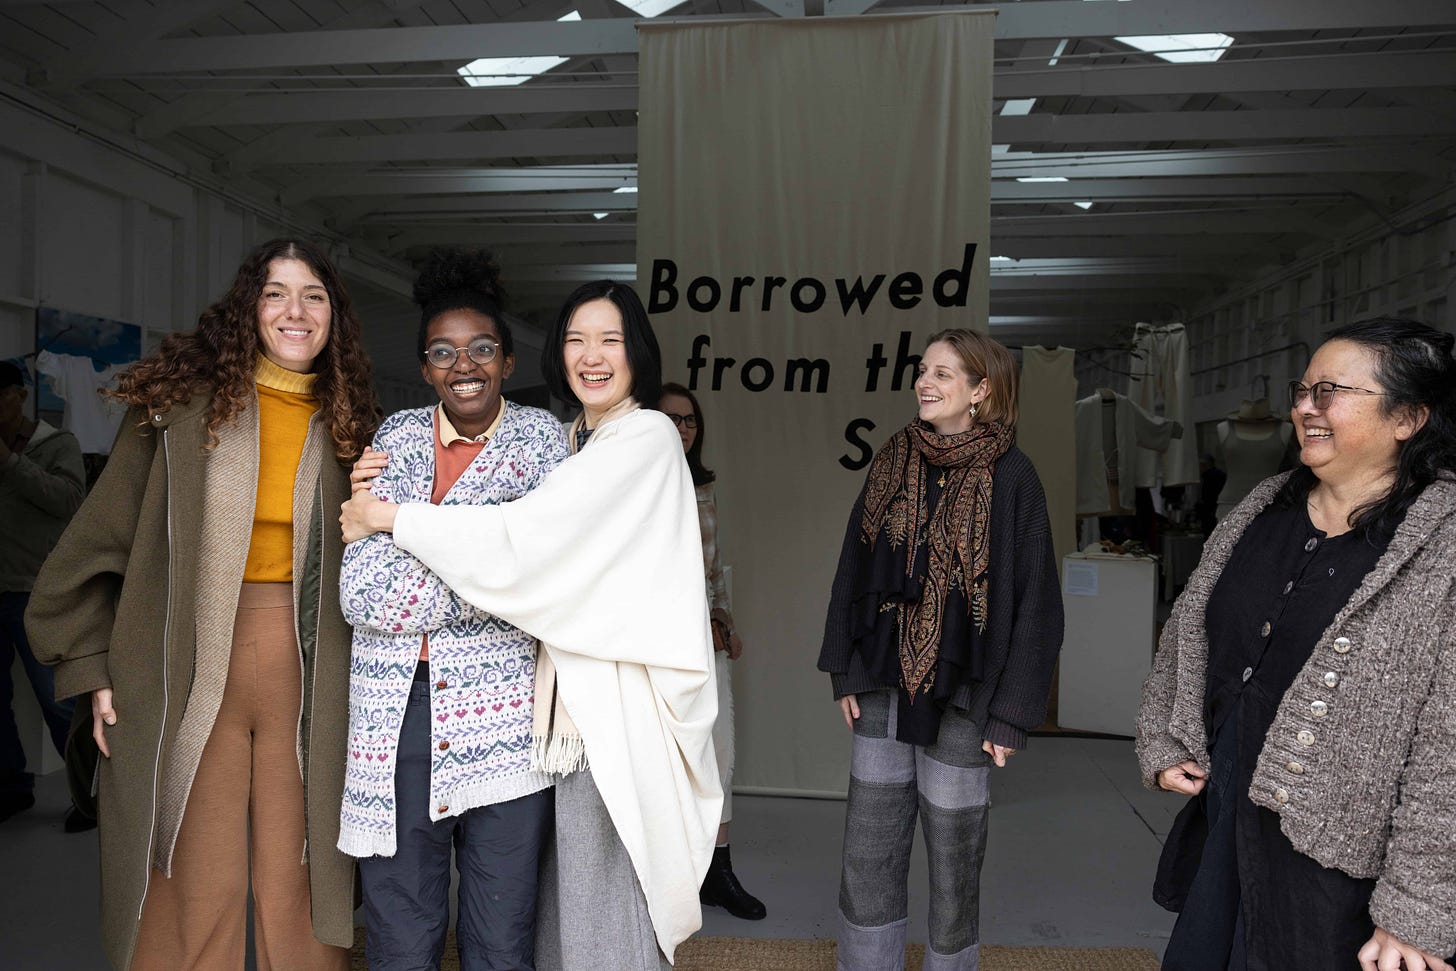 With fellow Fibershed Design Challenge designers Alix Vasquez ofHerderin, Flore Costumé, Carol Miltimore of Seek Collective, and Lisa Takata. Photo by Paige Green.